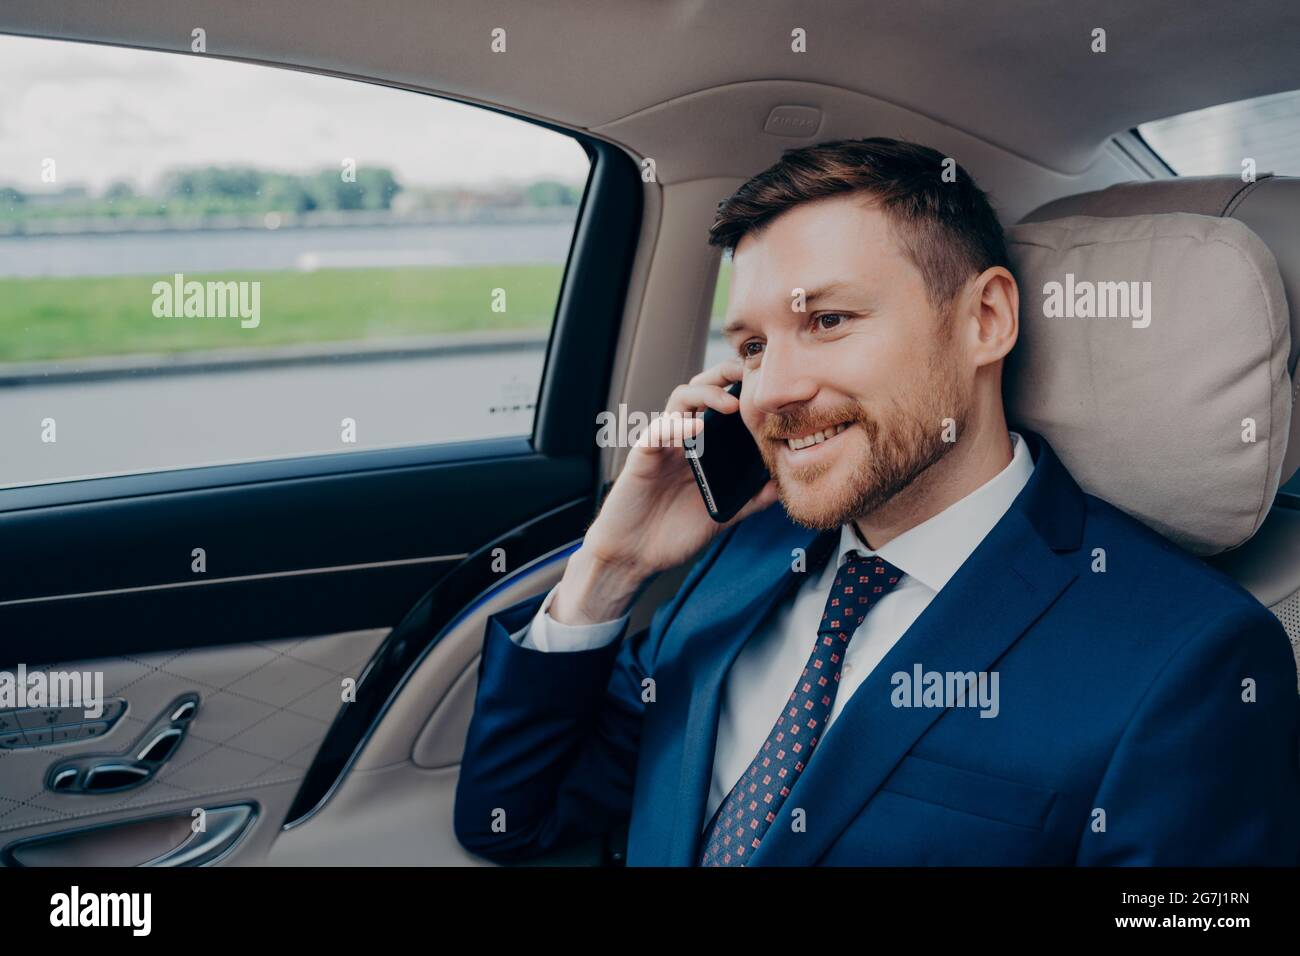 Attractive skilled banker in formal suit riding in corporate car and talking on cellphone Stock Photo